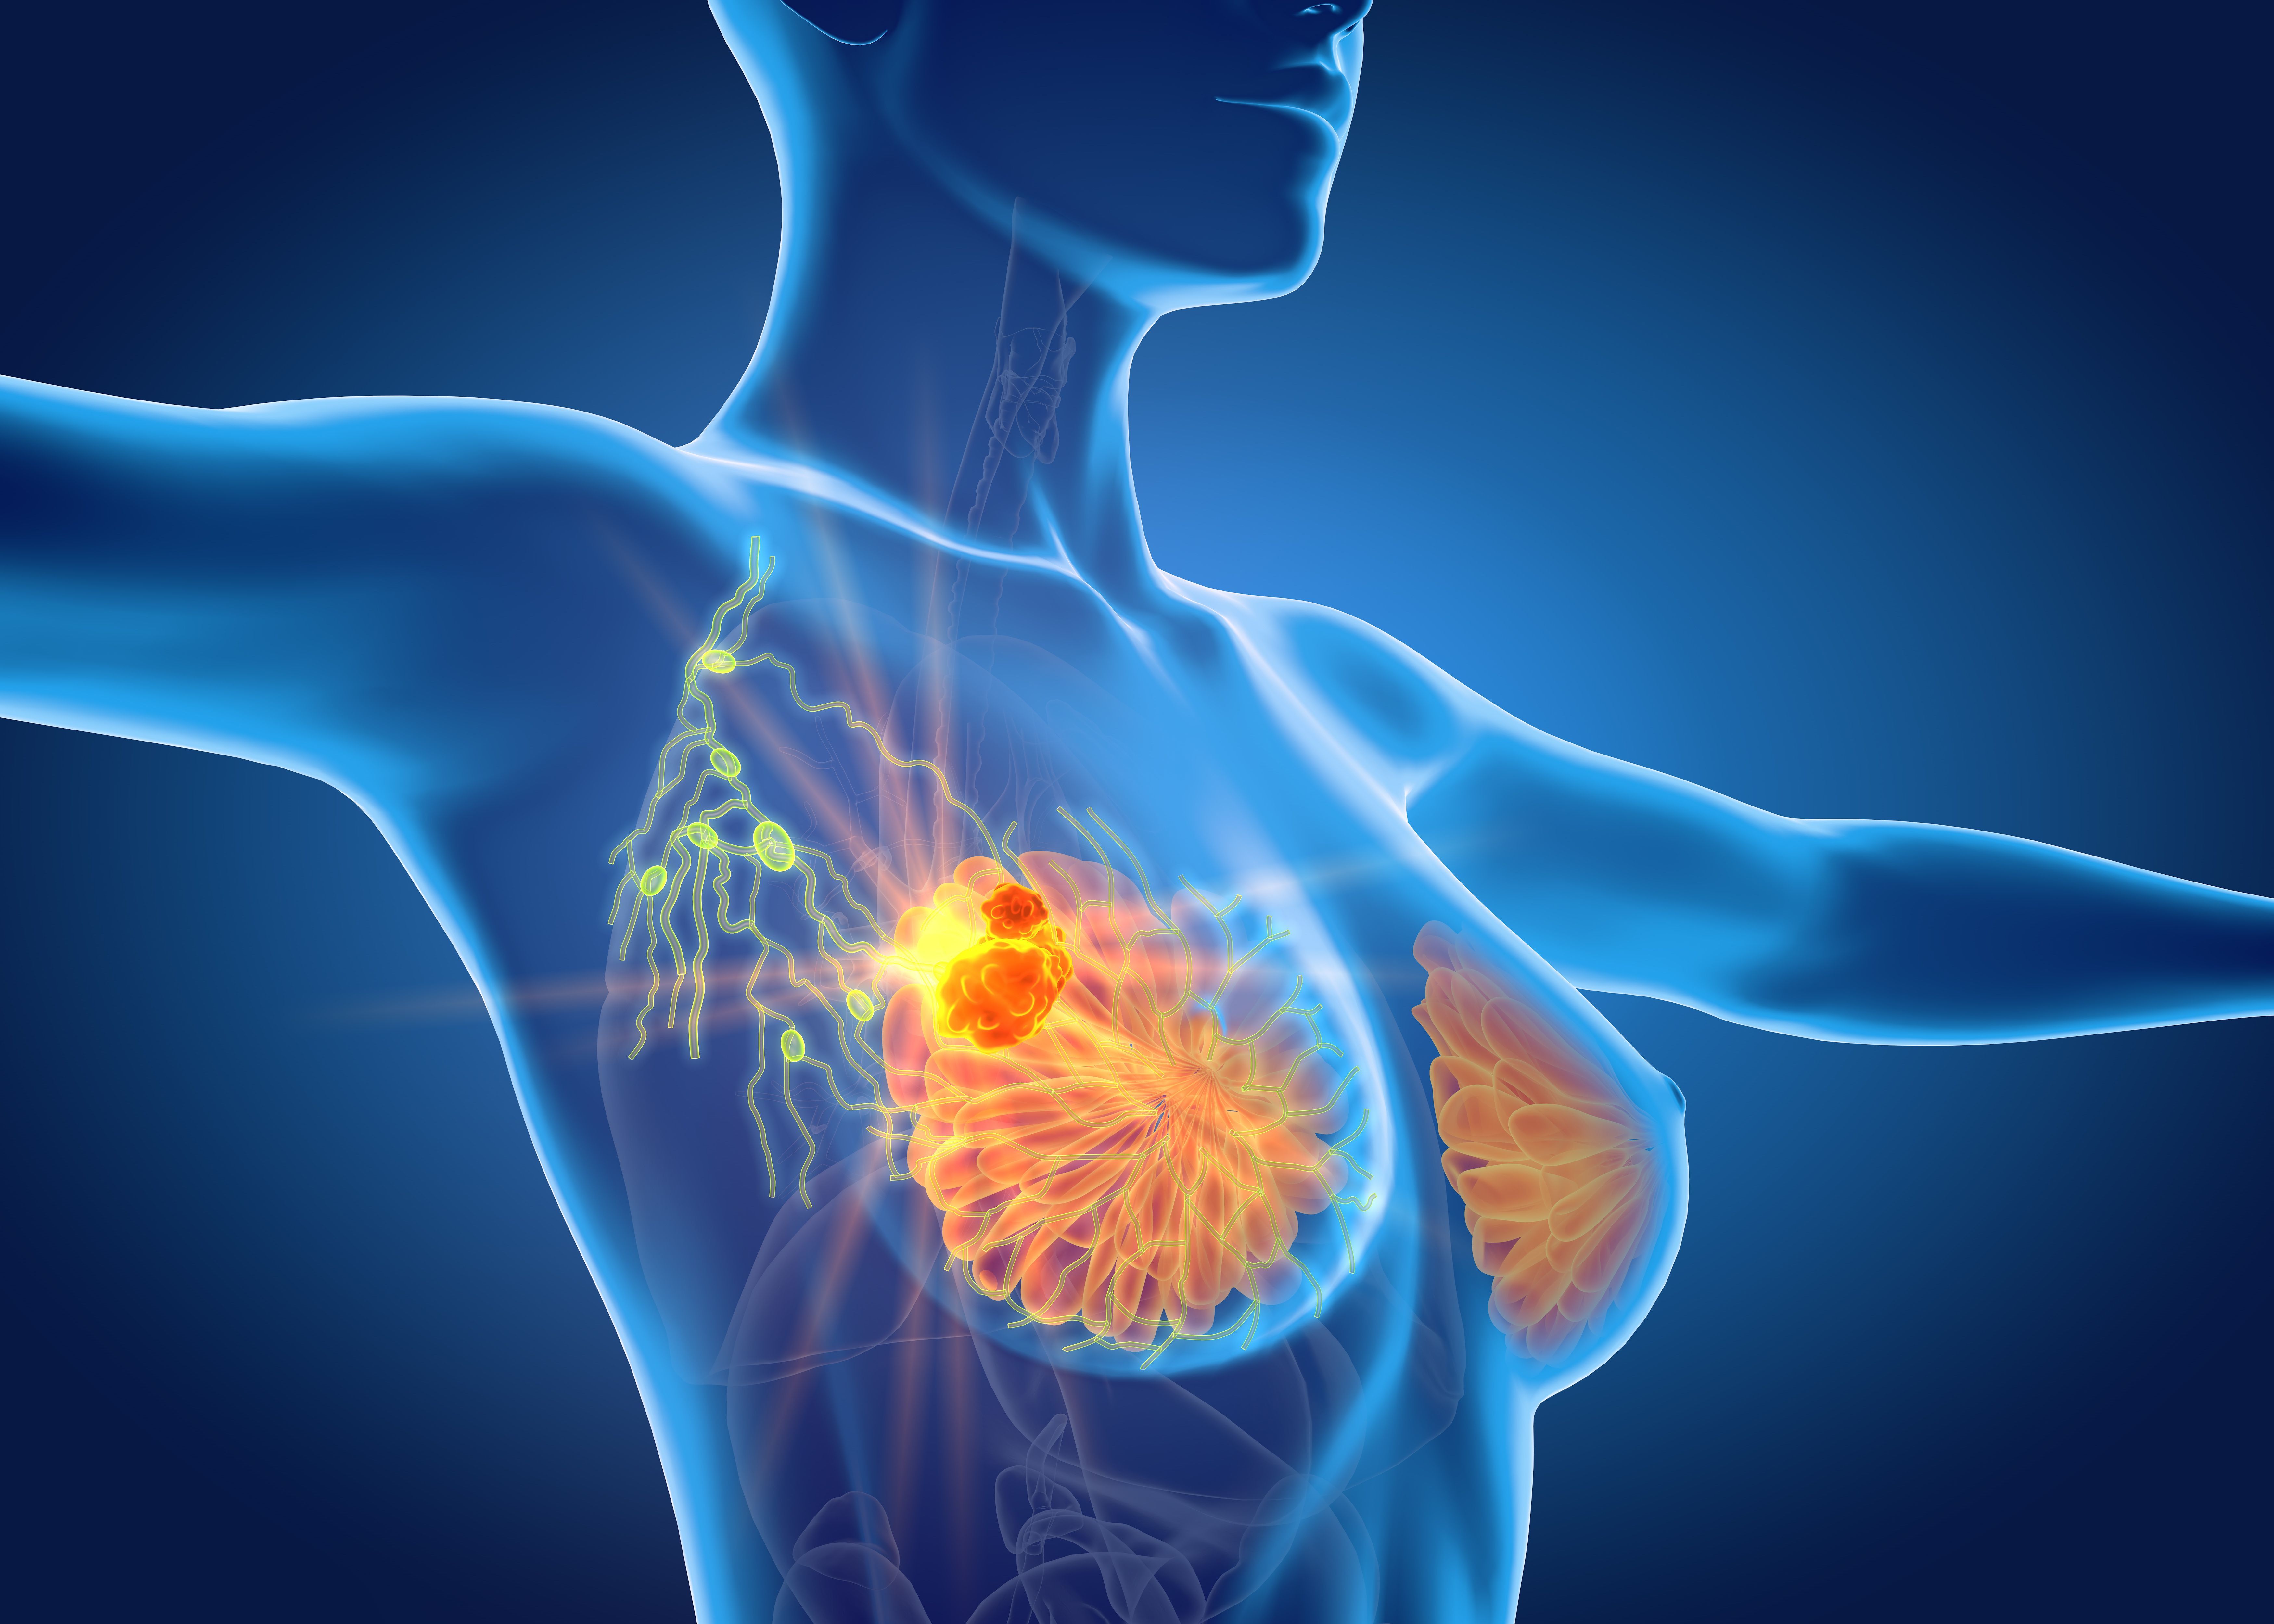 Low Adherence to Endocrine Therapy Highlights Urgent Need in the Breast Cancer Space - AJMC.com Managed Markets Network